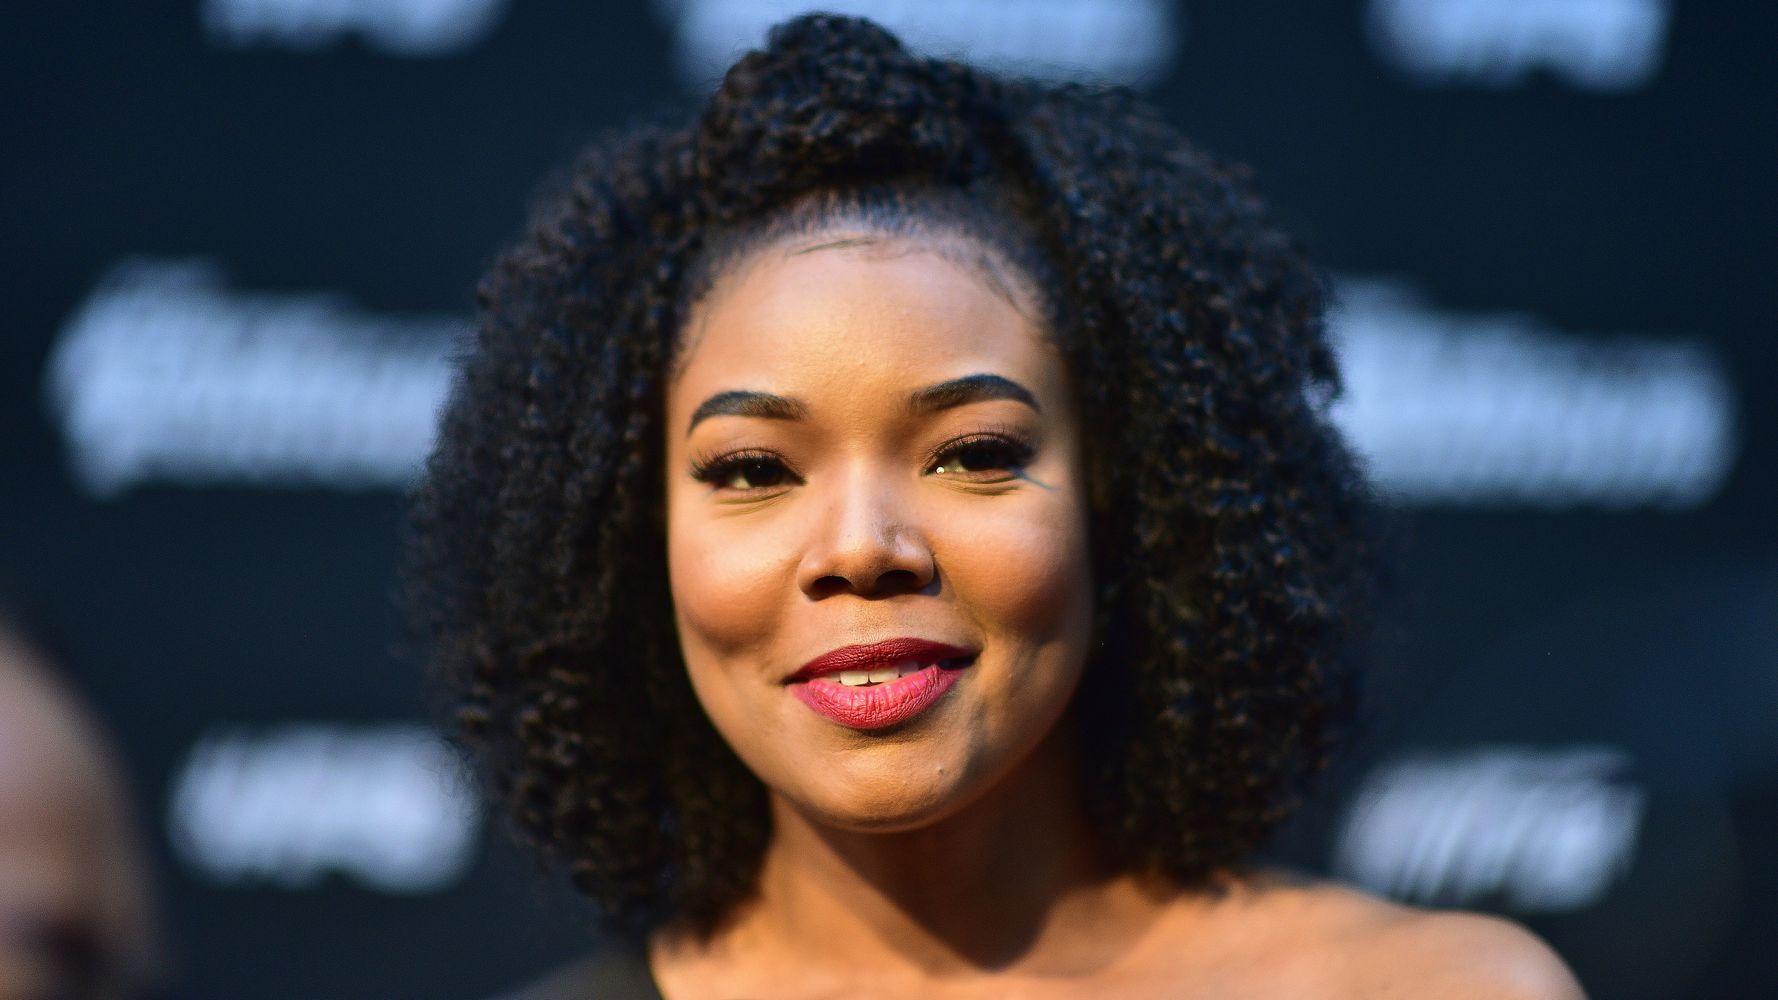 Gabrielle Union  We're Going to Need More Wine: Stories That Are Funny,  Complicated, and True 